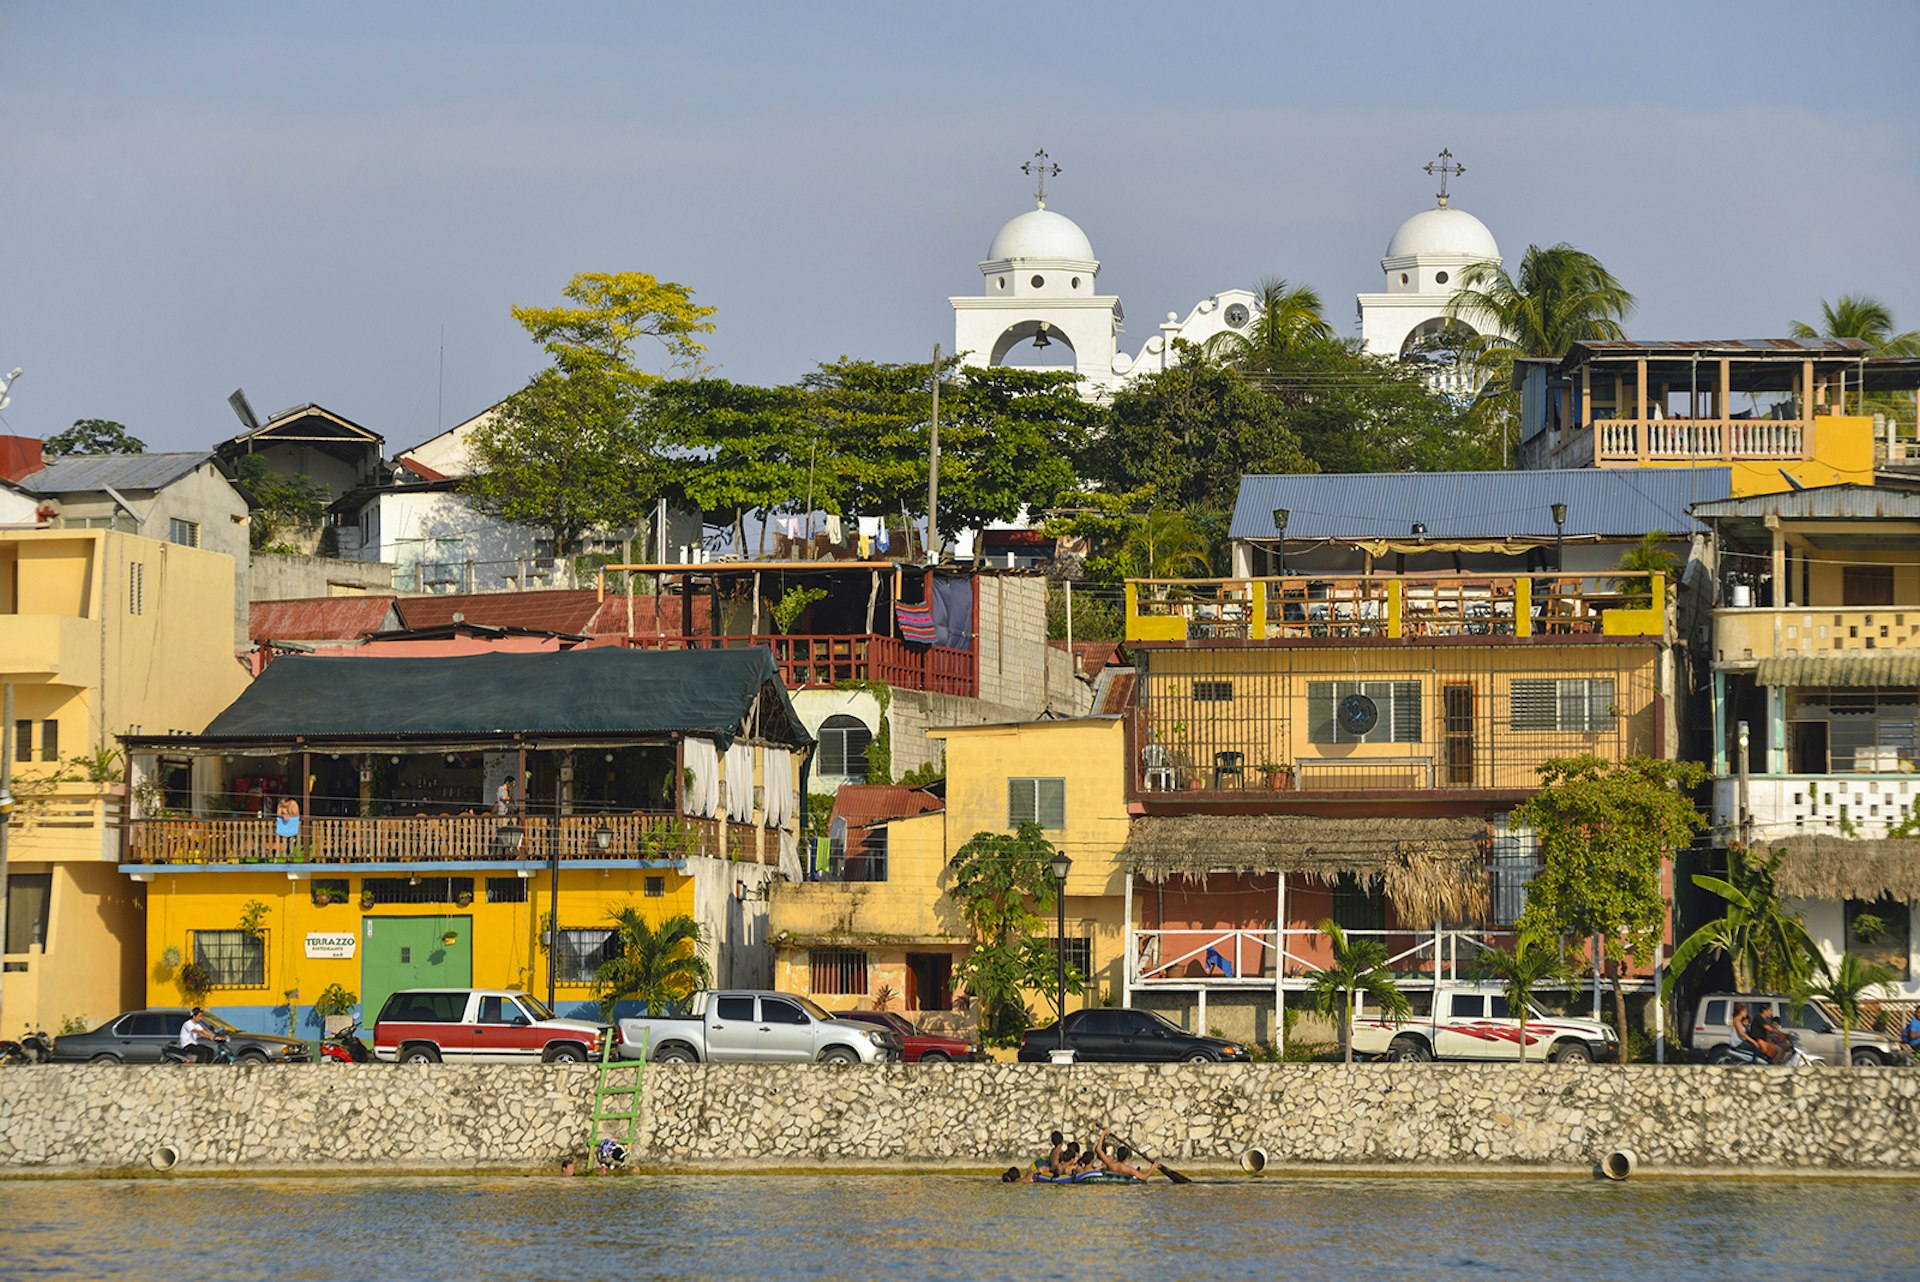 Flores is the capital city of El Petén © Christian Heeb / Getty Images